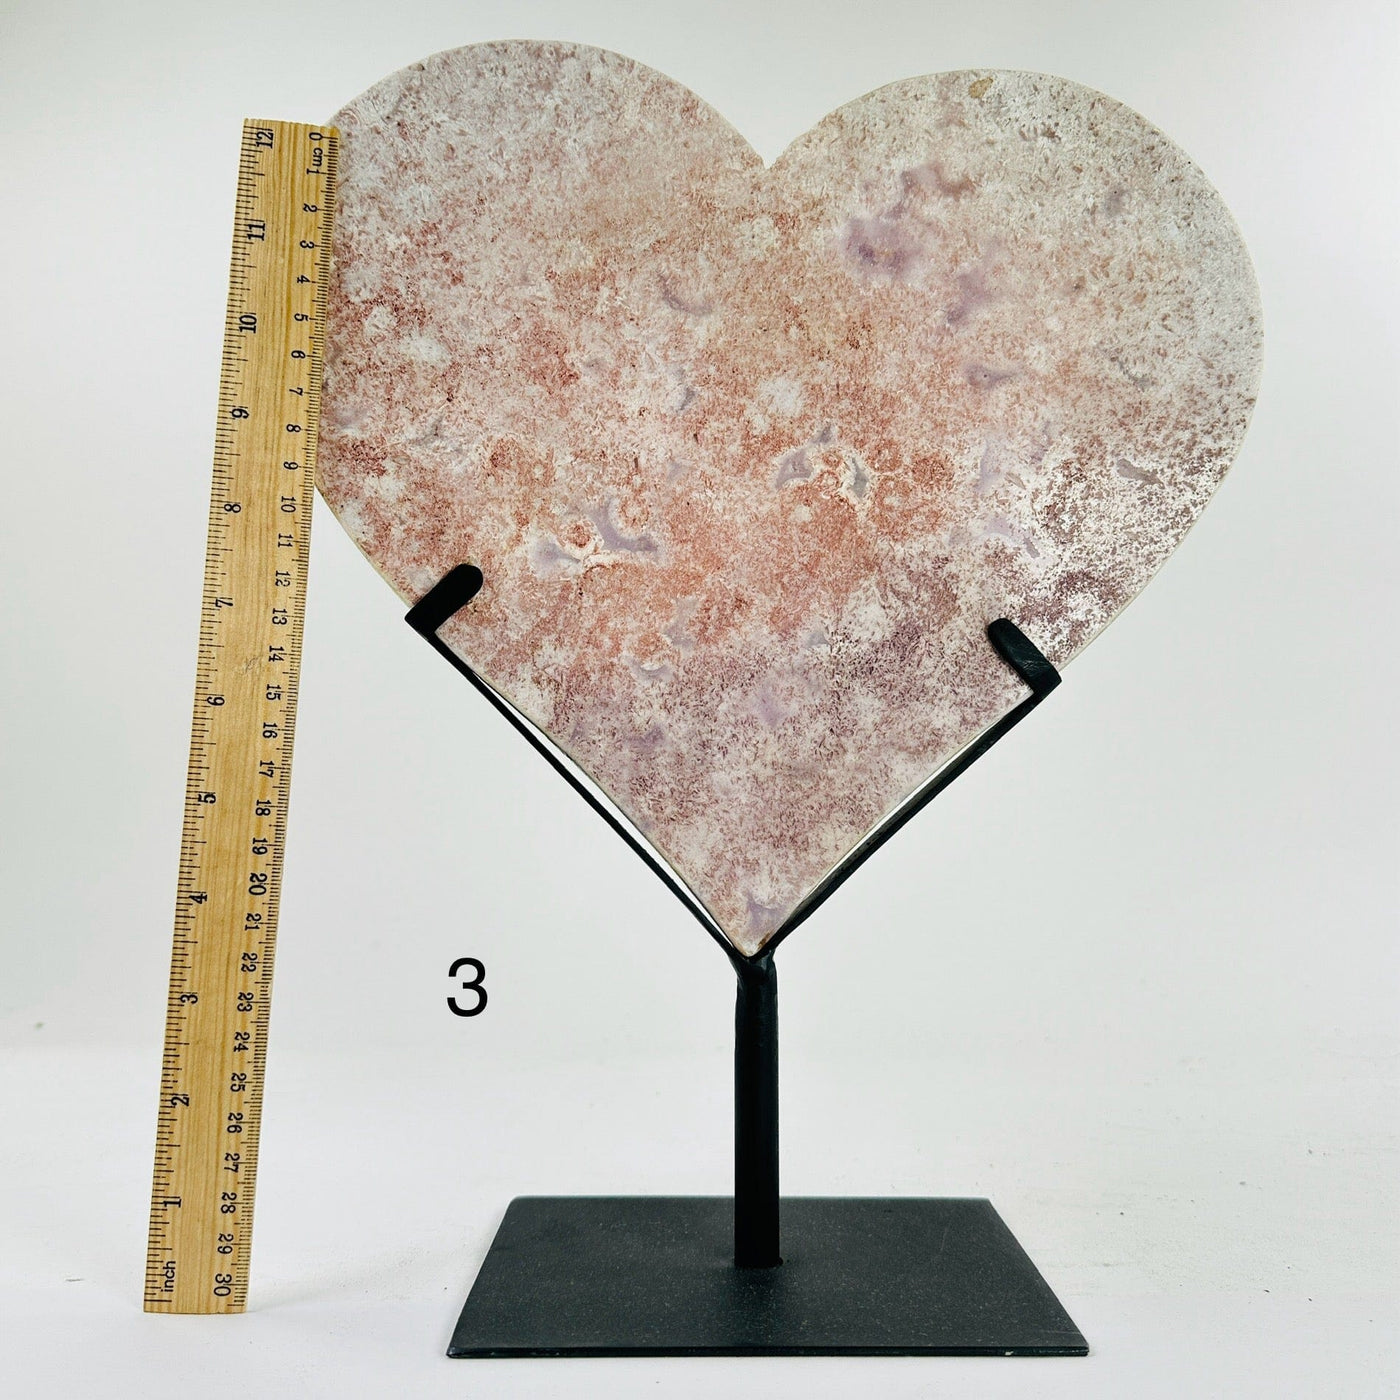 pink amethyst heart on metal stand next to a ruler for size reference